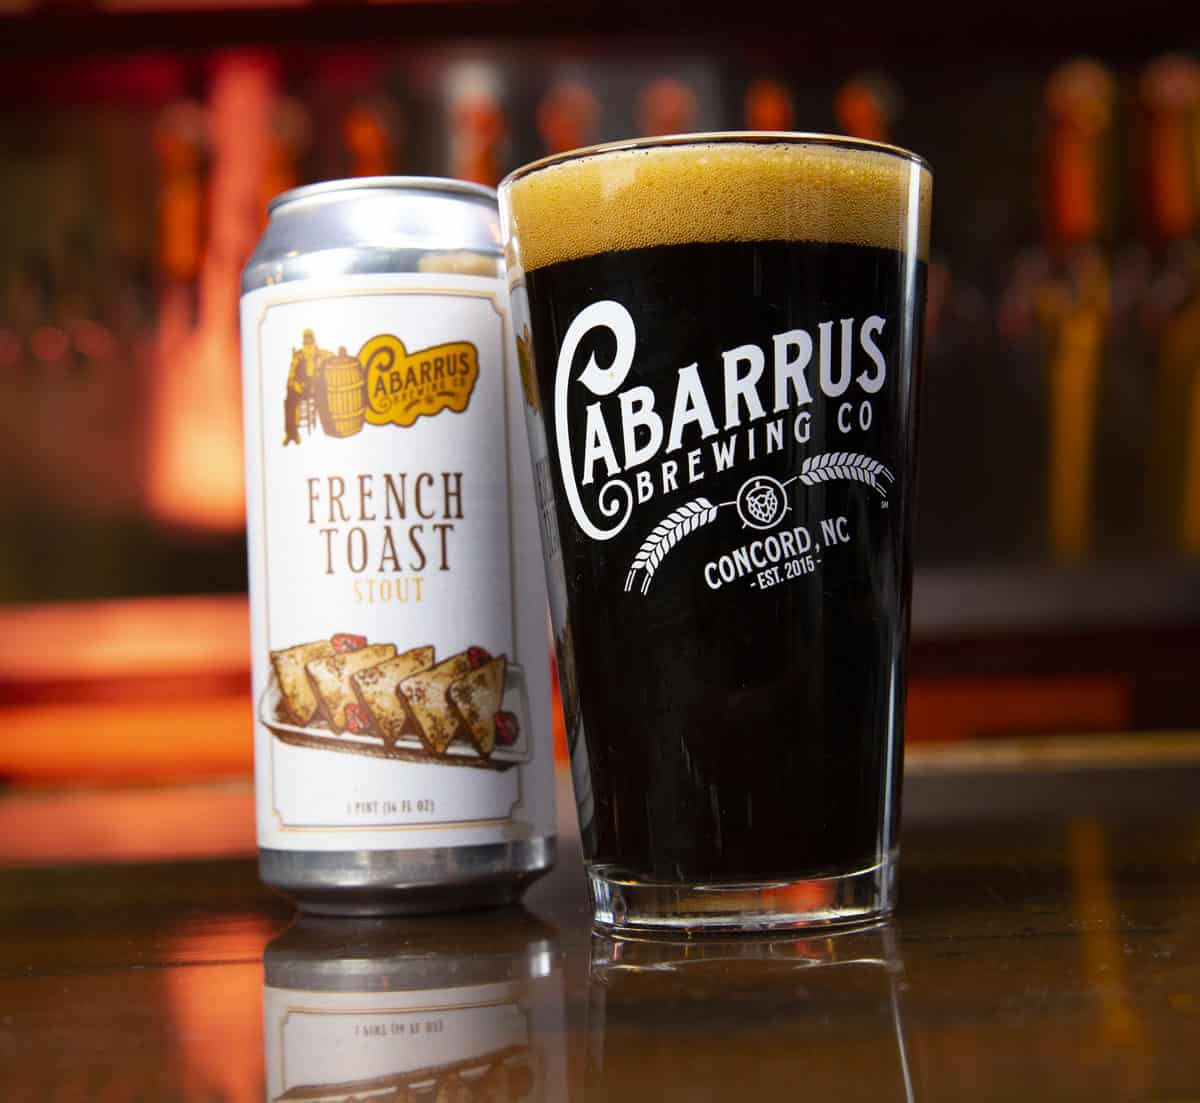 Cabarrus Brewing Co. French Toast Stout